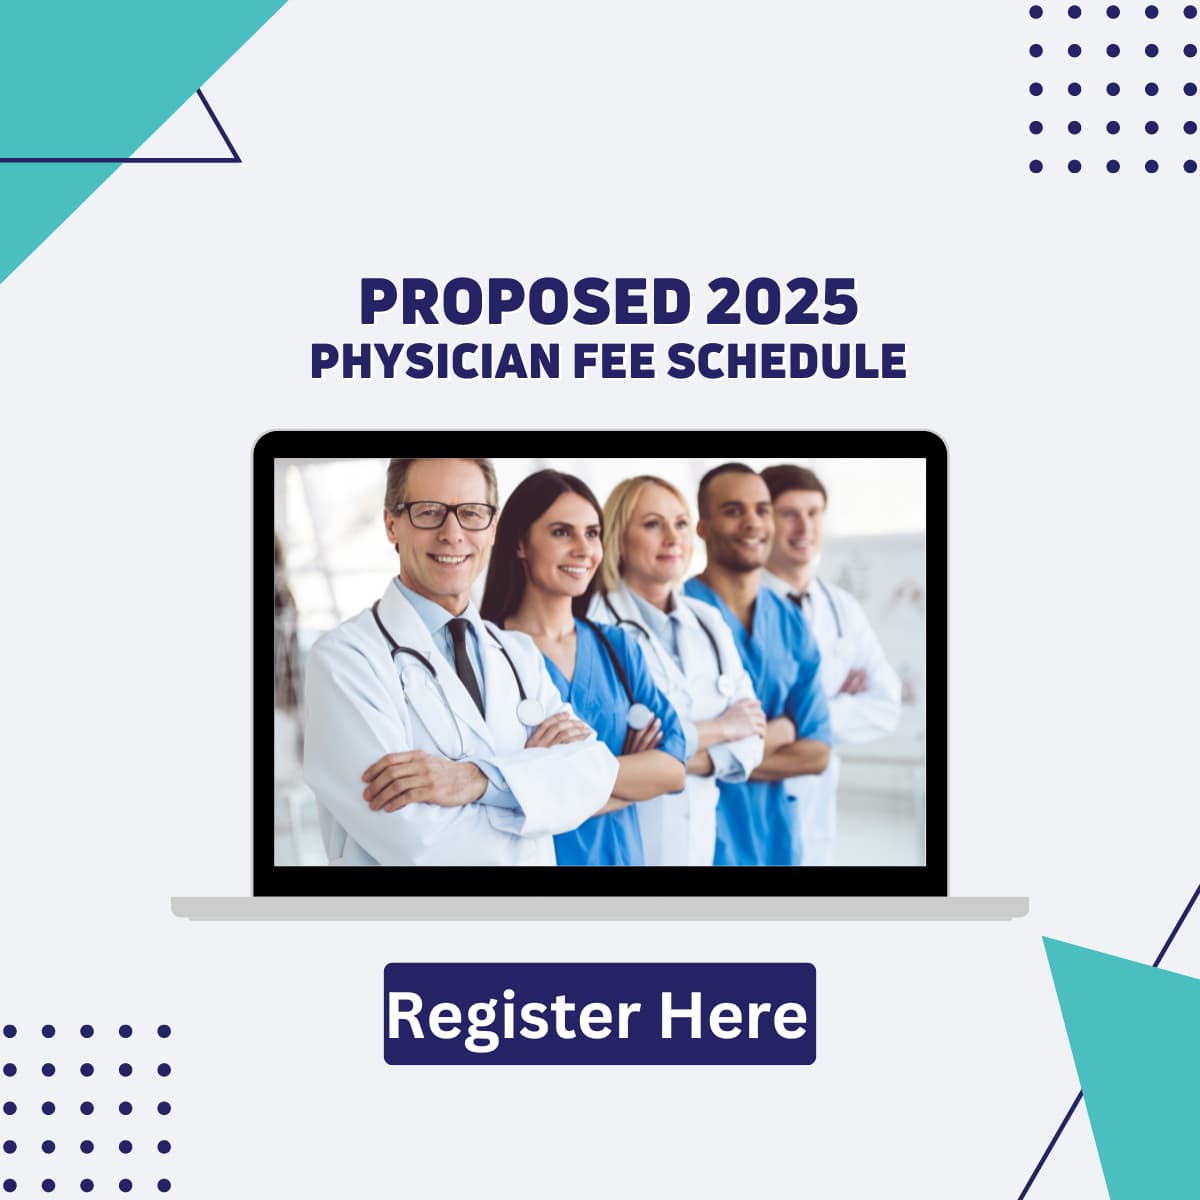 Proposed 2025 Physician Fee Schedule